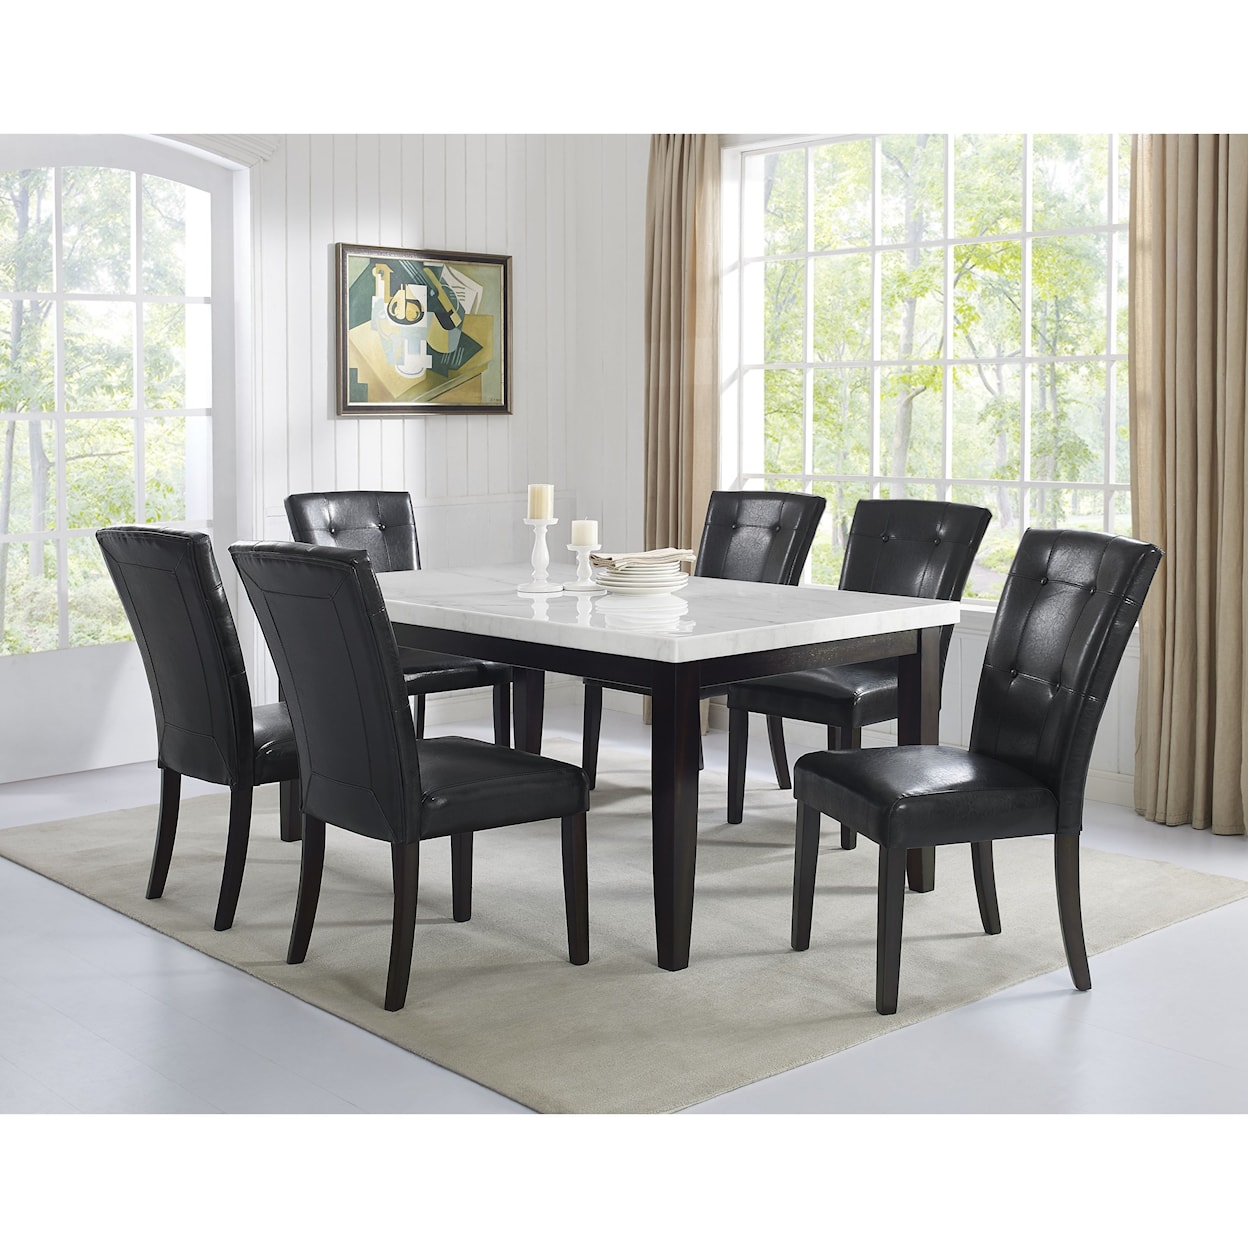 Steve Silver Francis 7 Piece Table and Chair Set